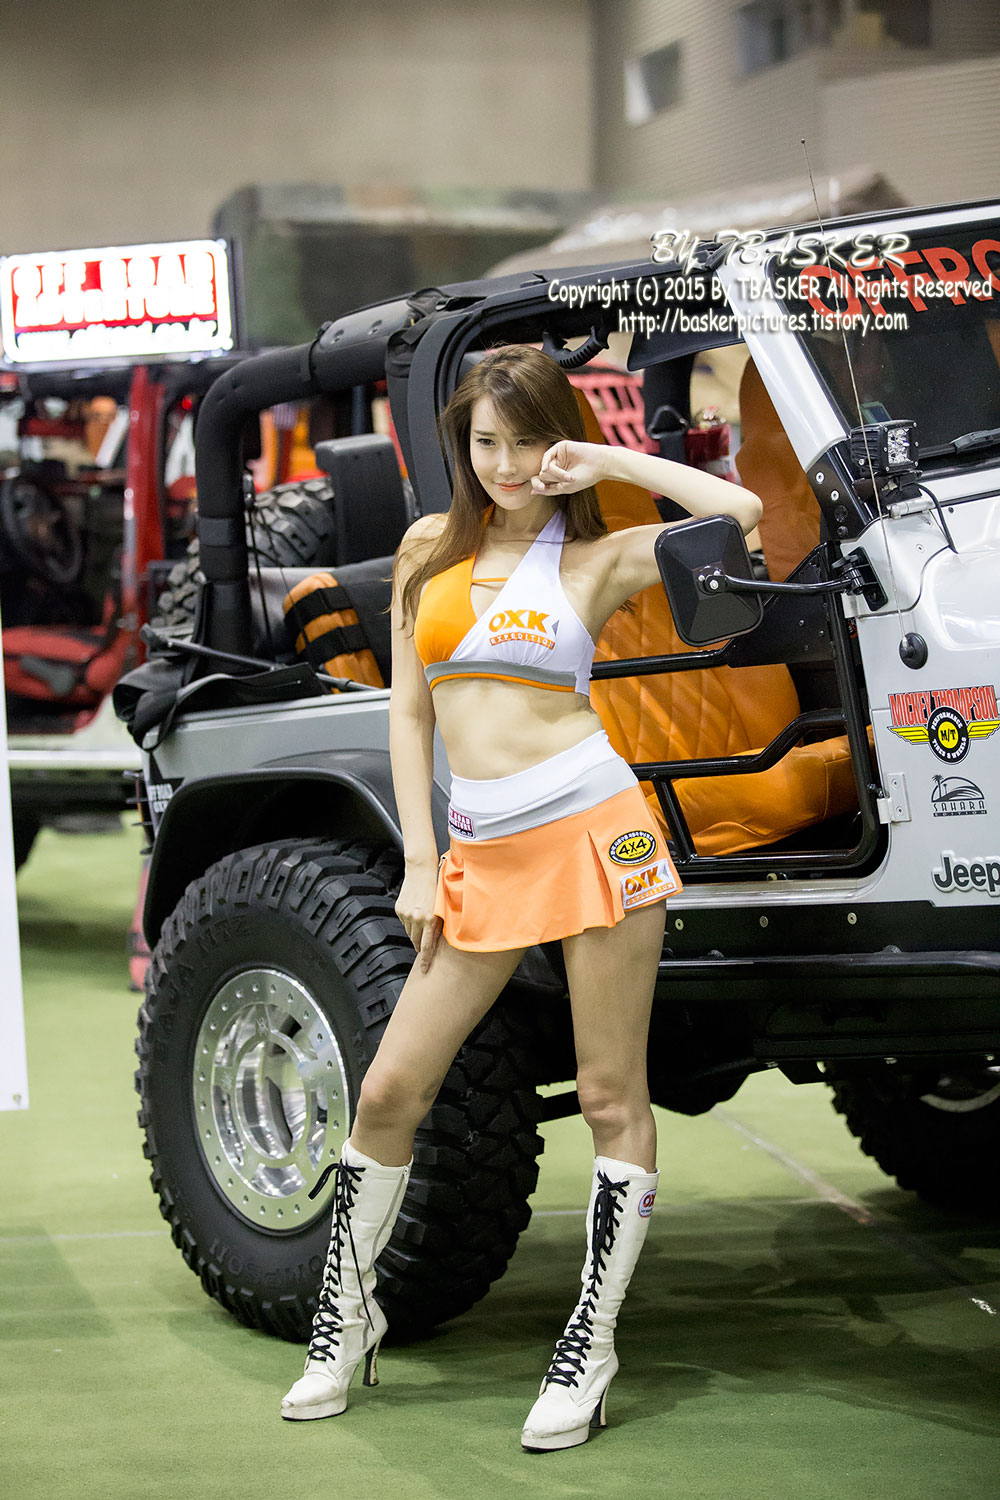 Lee Hyo Young Automotive Week 2015 OXK Expedition